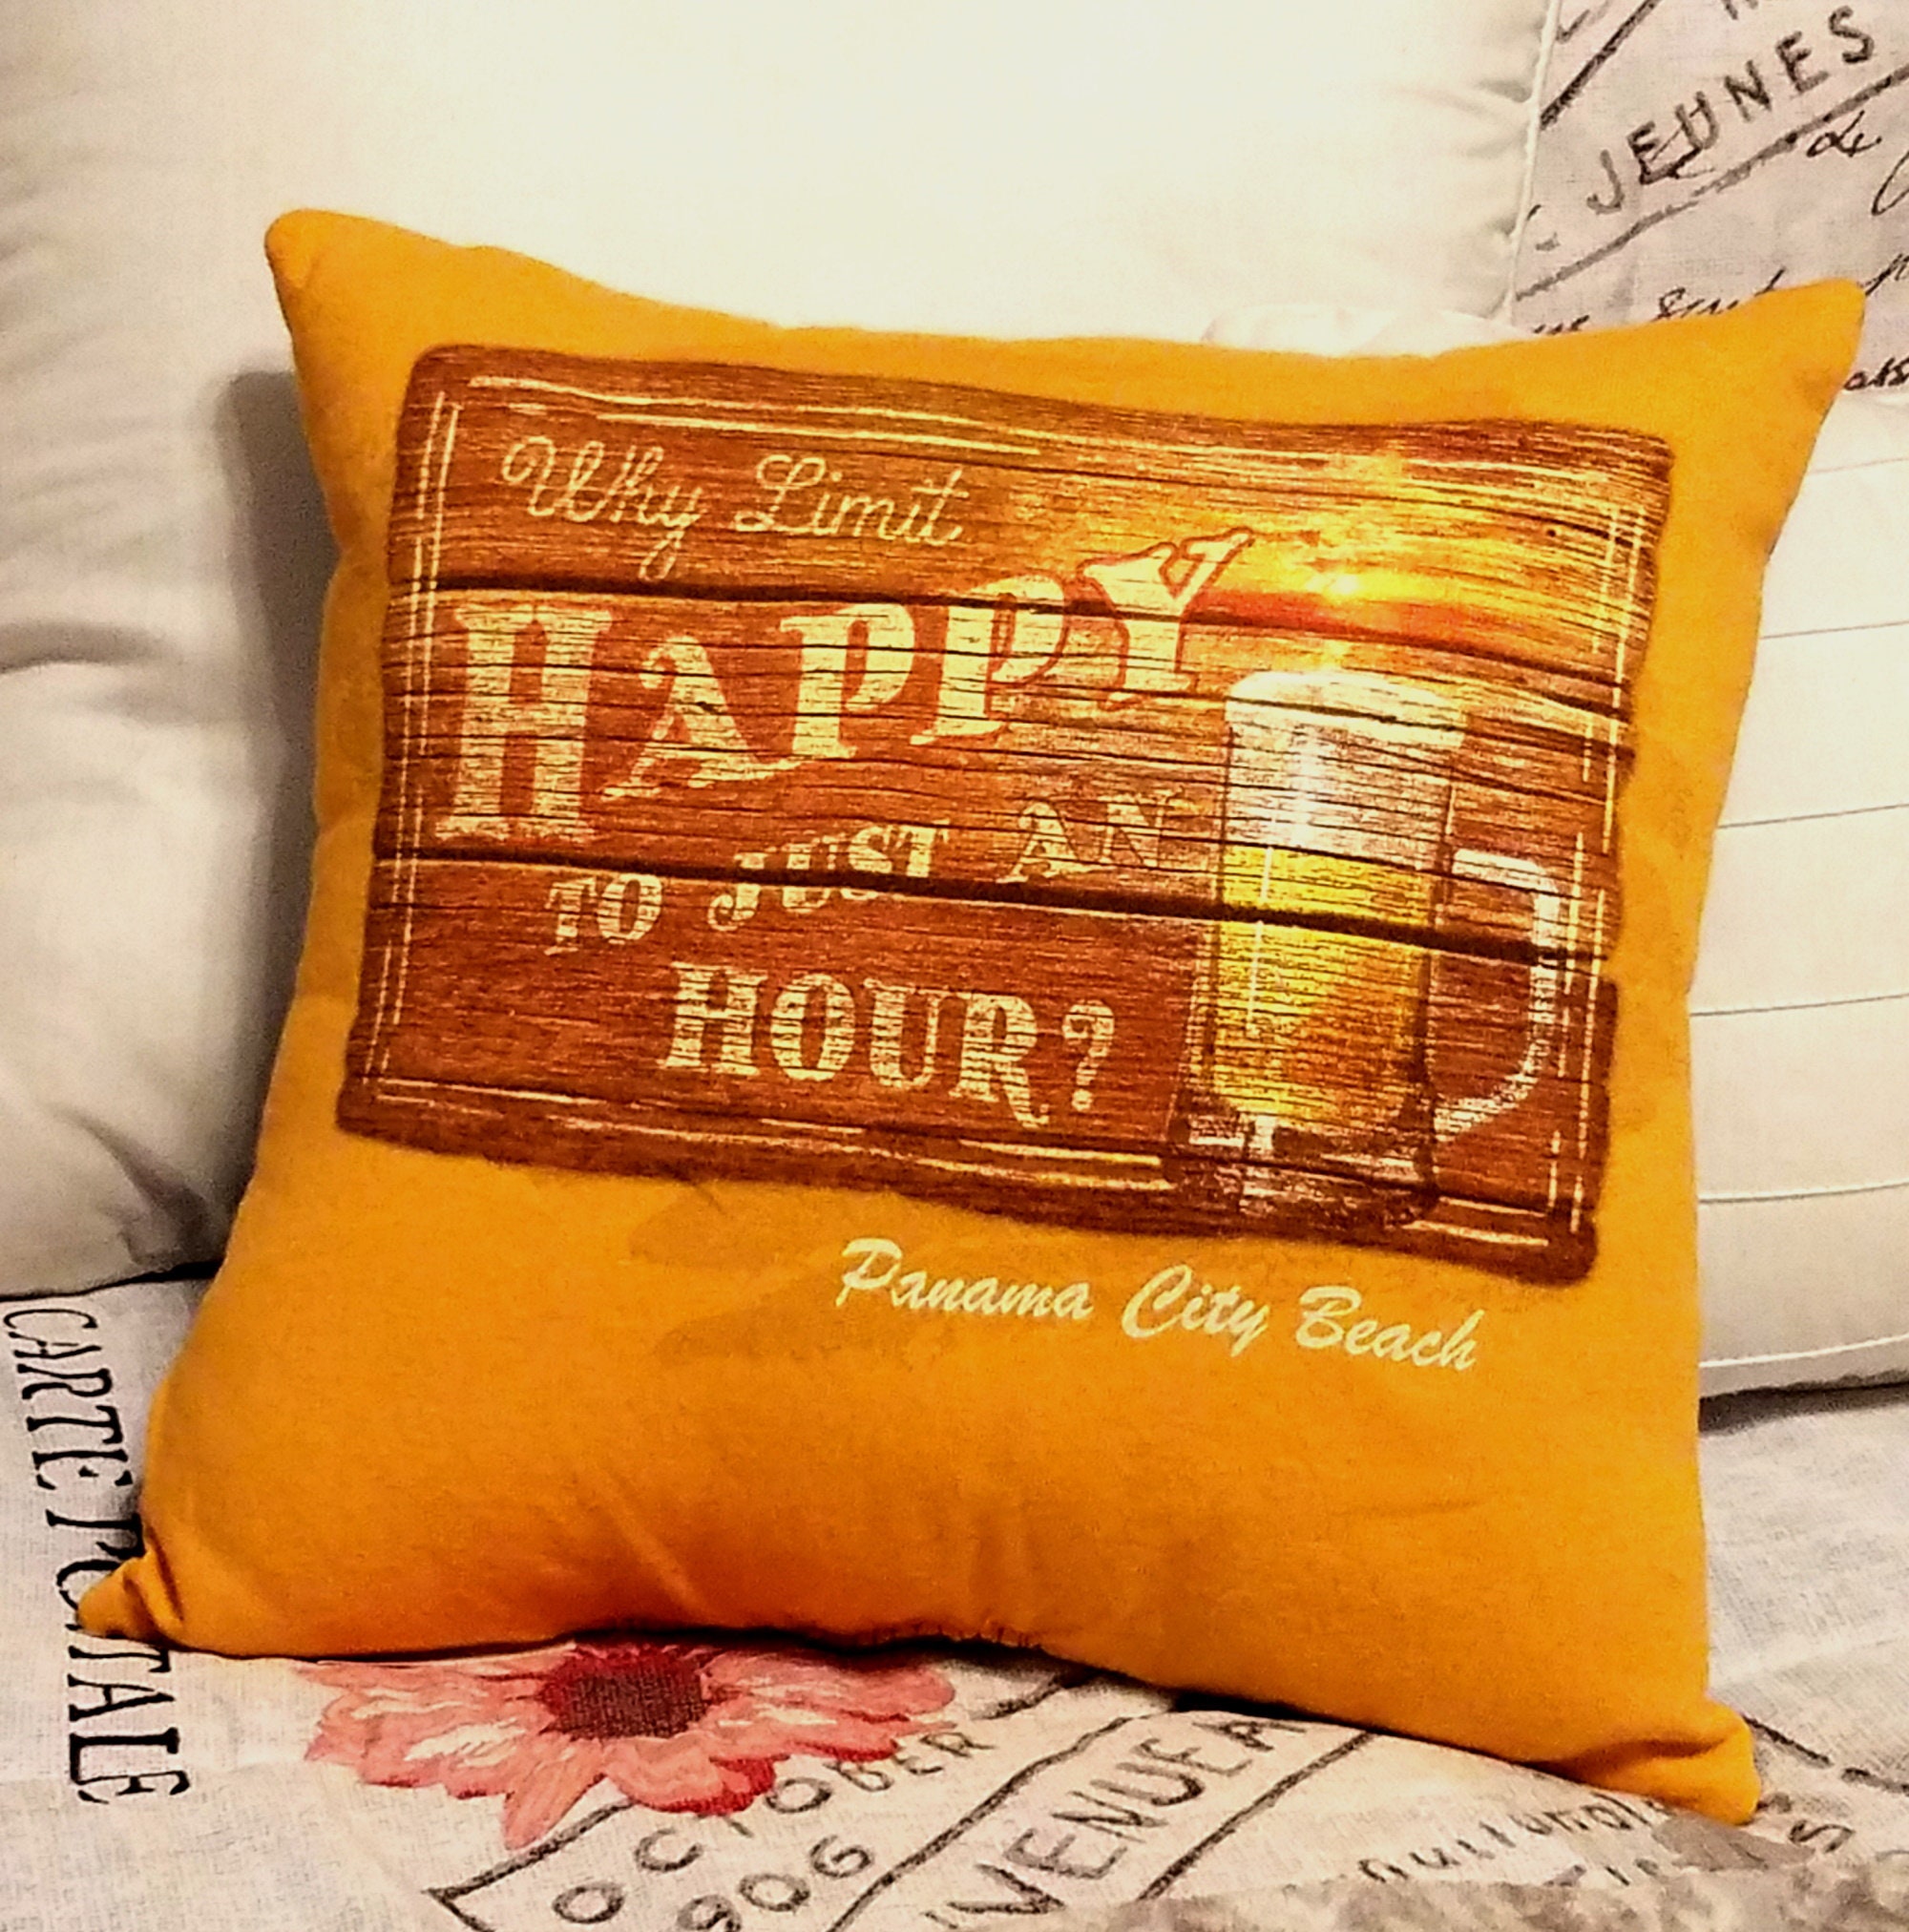 Memory pillows from a shirt or clothing 8 x 8 – Heartsdesign